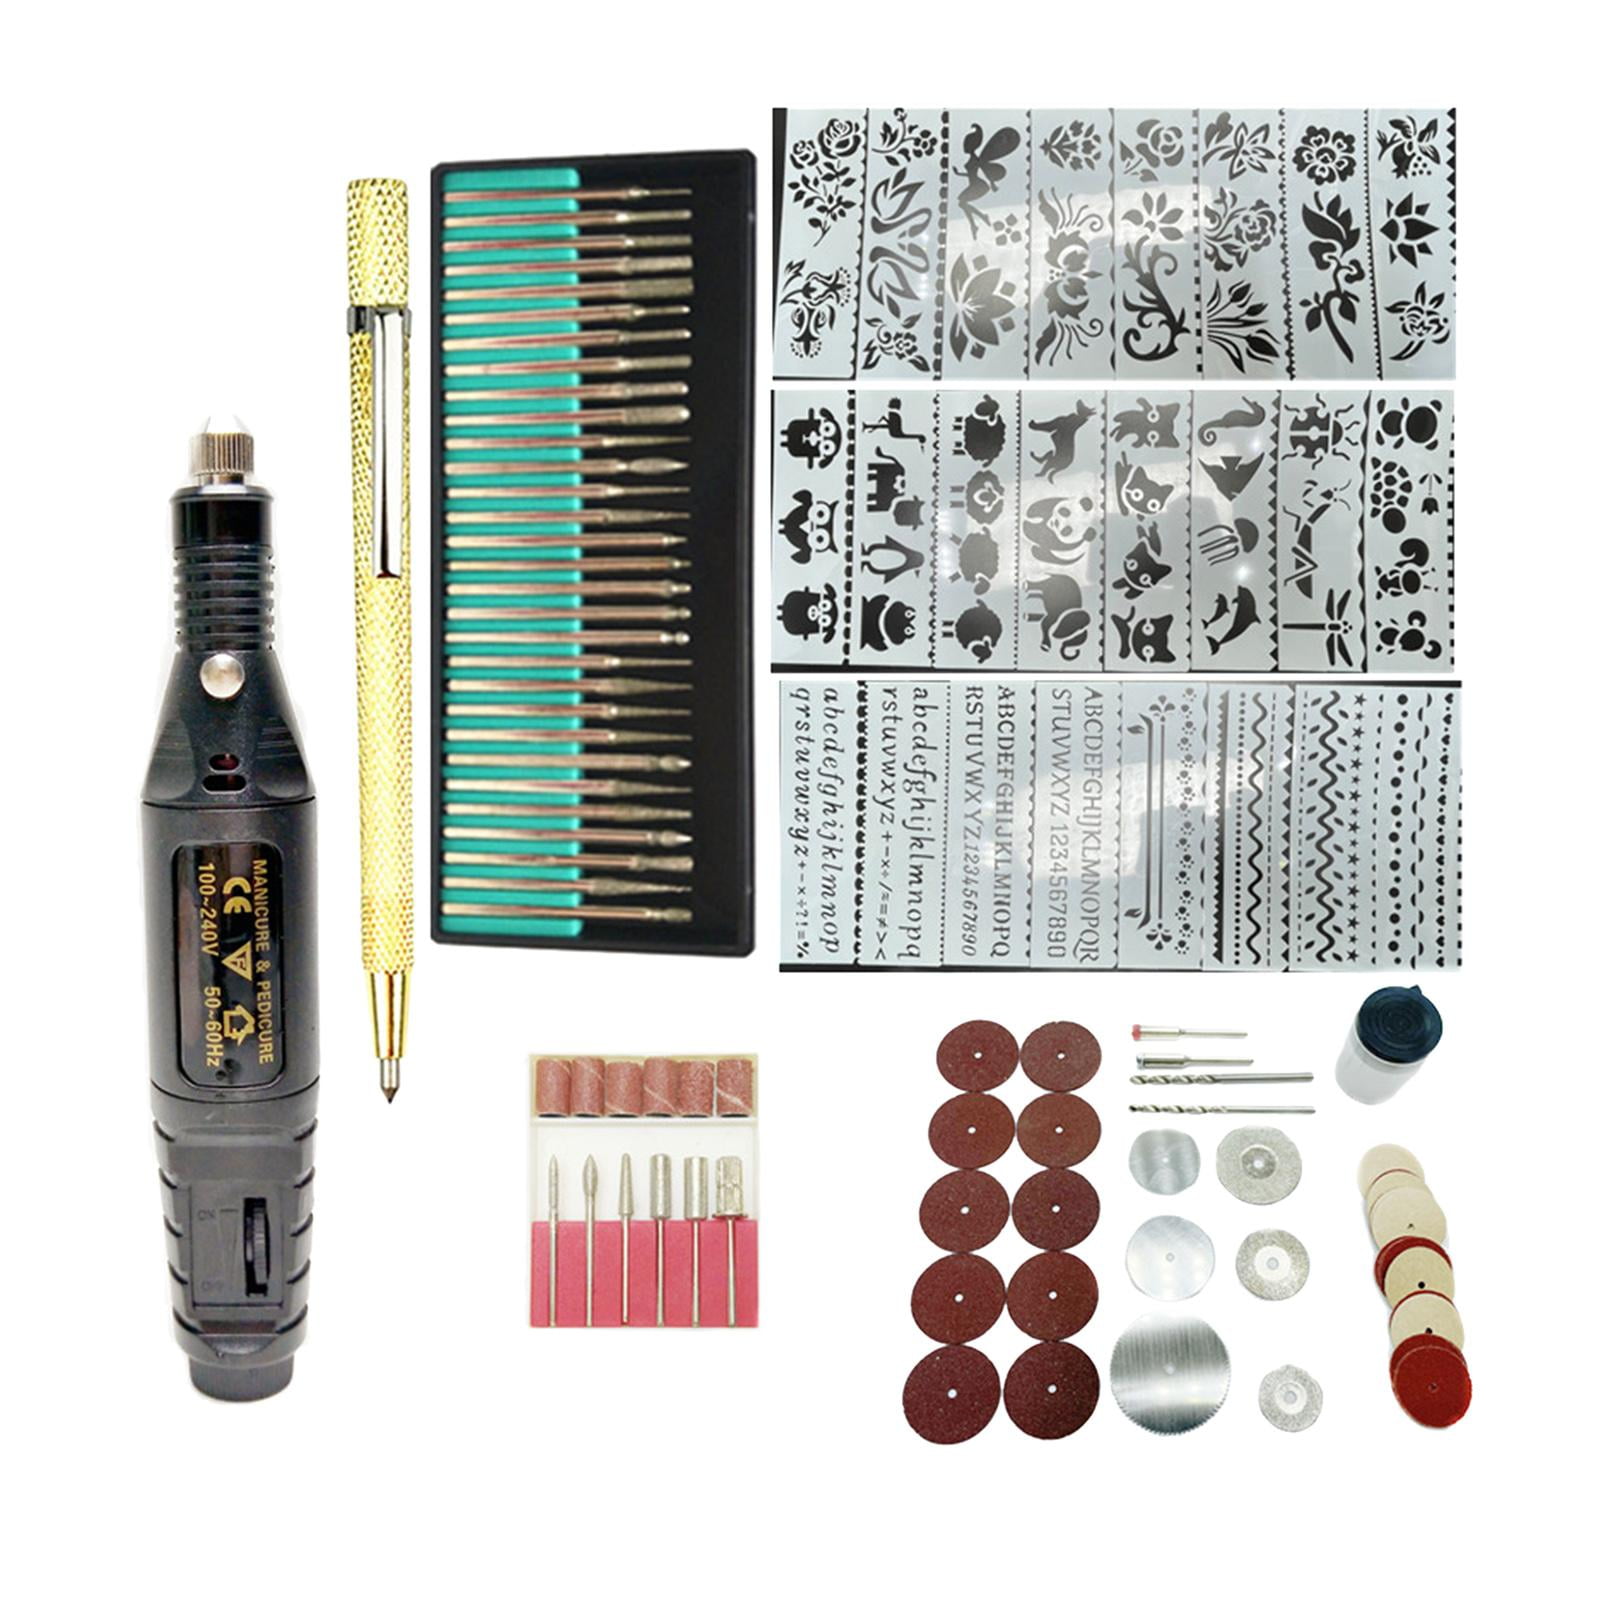 108Pcs Engraving Tool Kit, Multi-Functional Corded Micro Engraver Etching  Pen Mini DIY Rotary Tool for Jewelry Glass Wood Metal Plastic with Scriber,  82 Accessories and 24 Stencils 